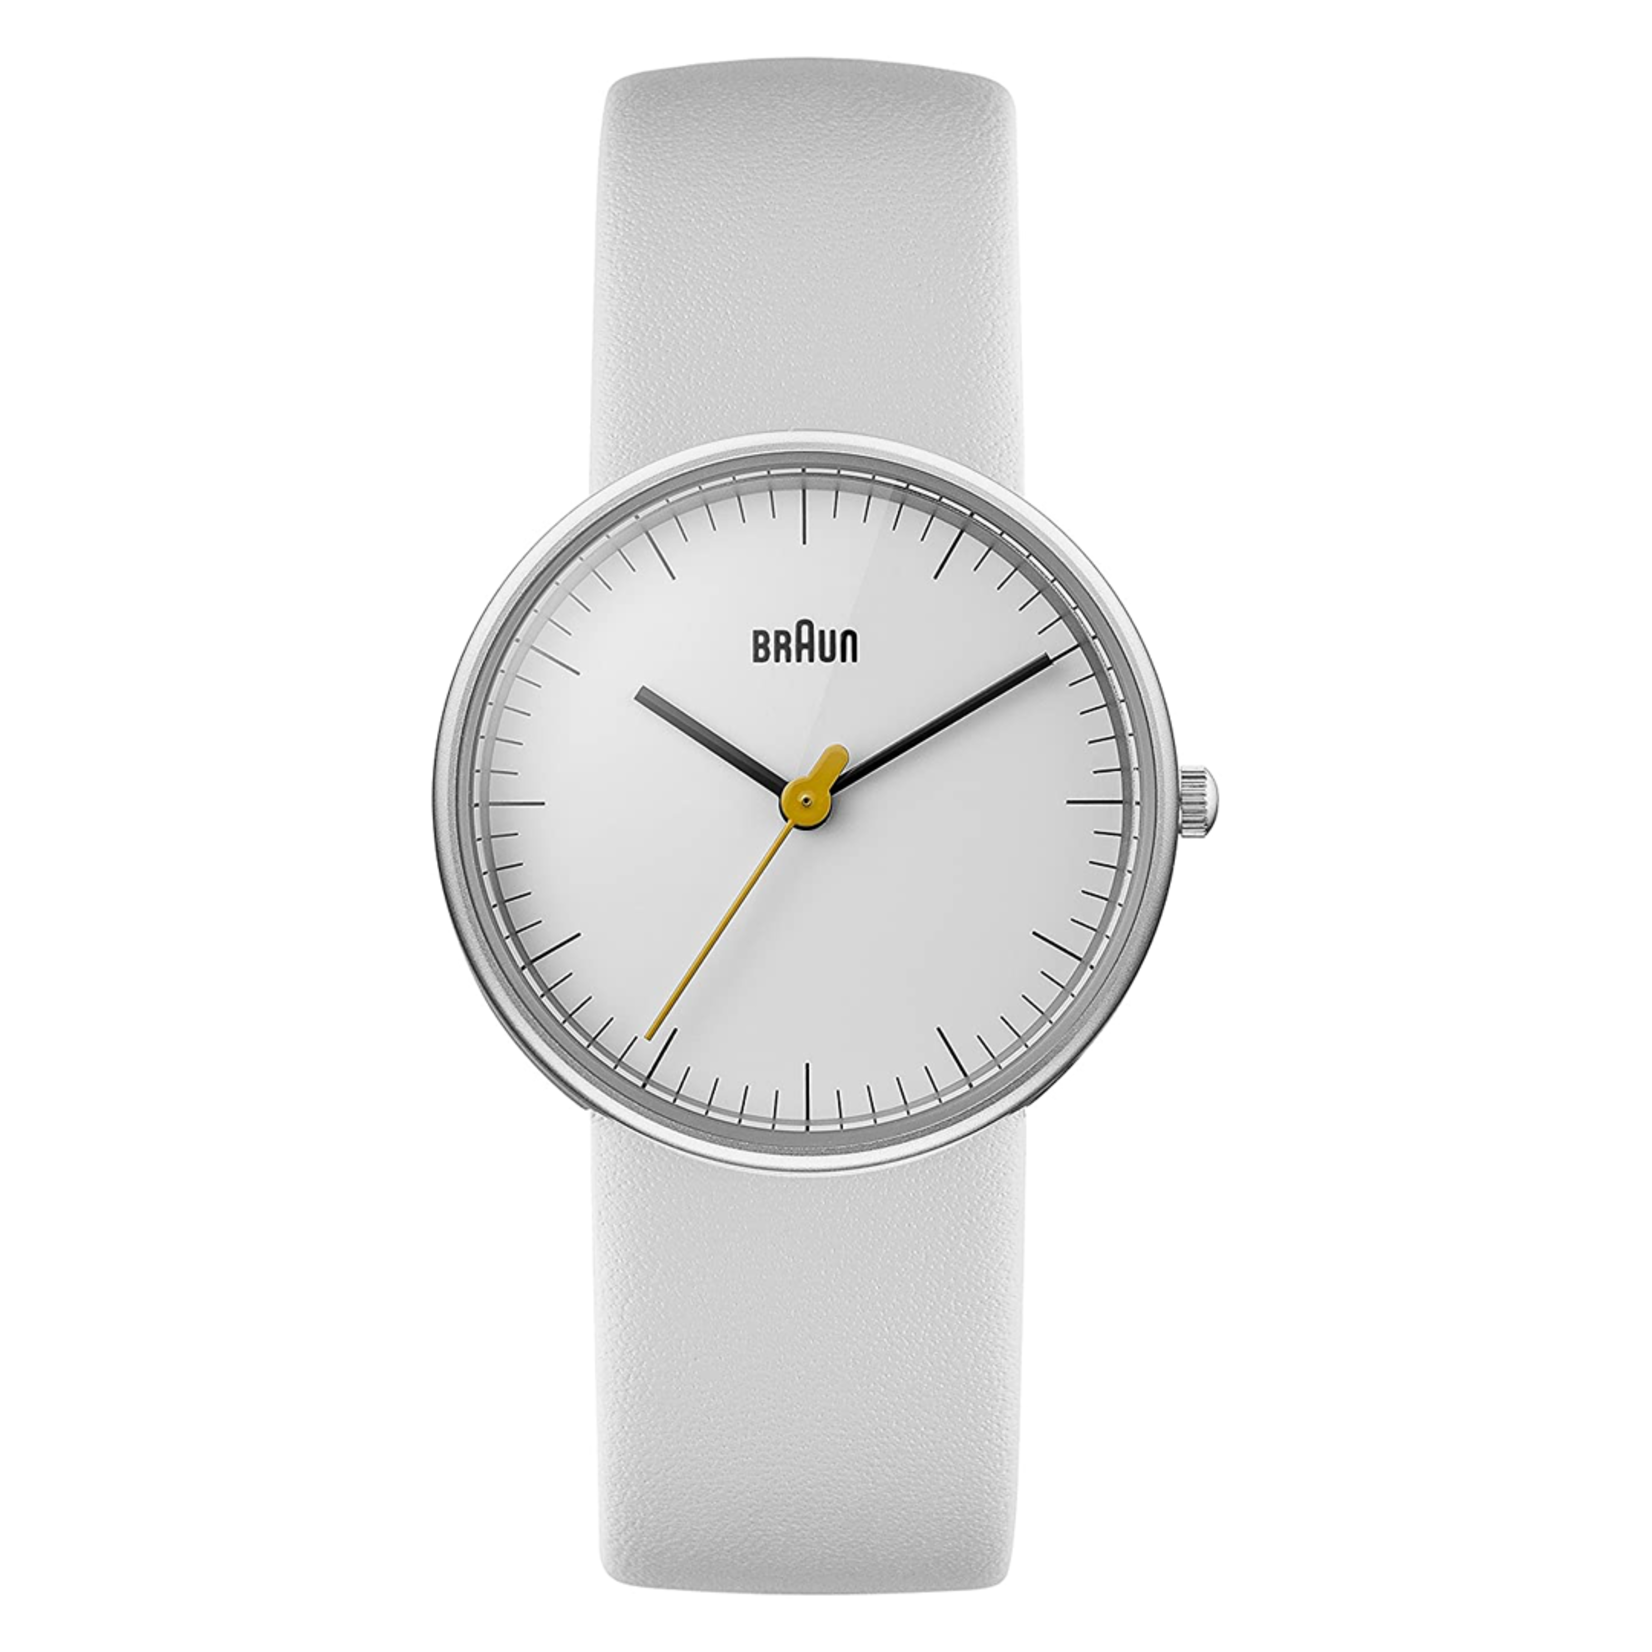 Braun BN0231 Classic Watch with Leather Strap (White)